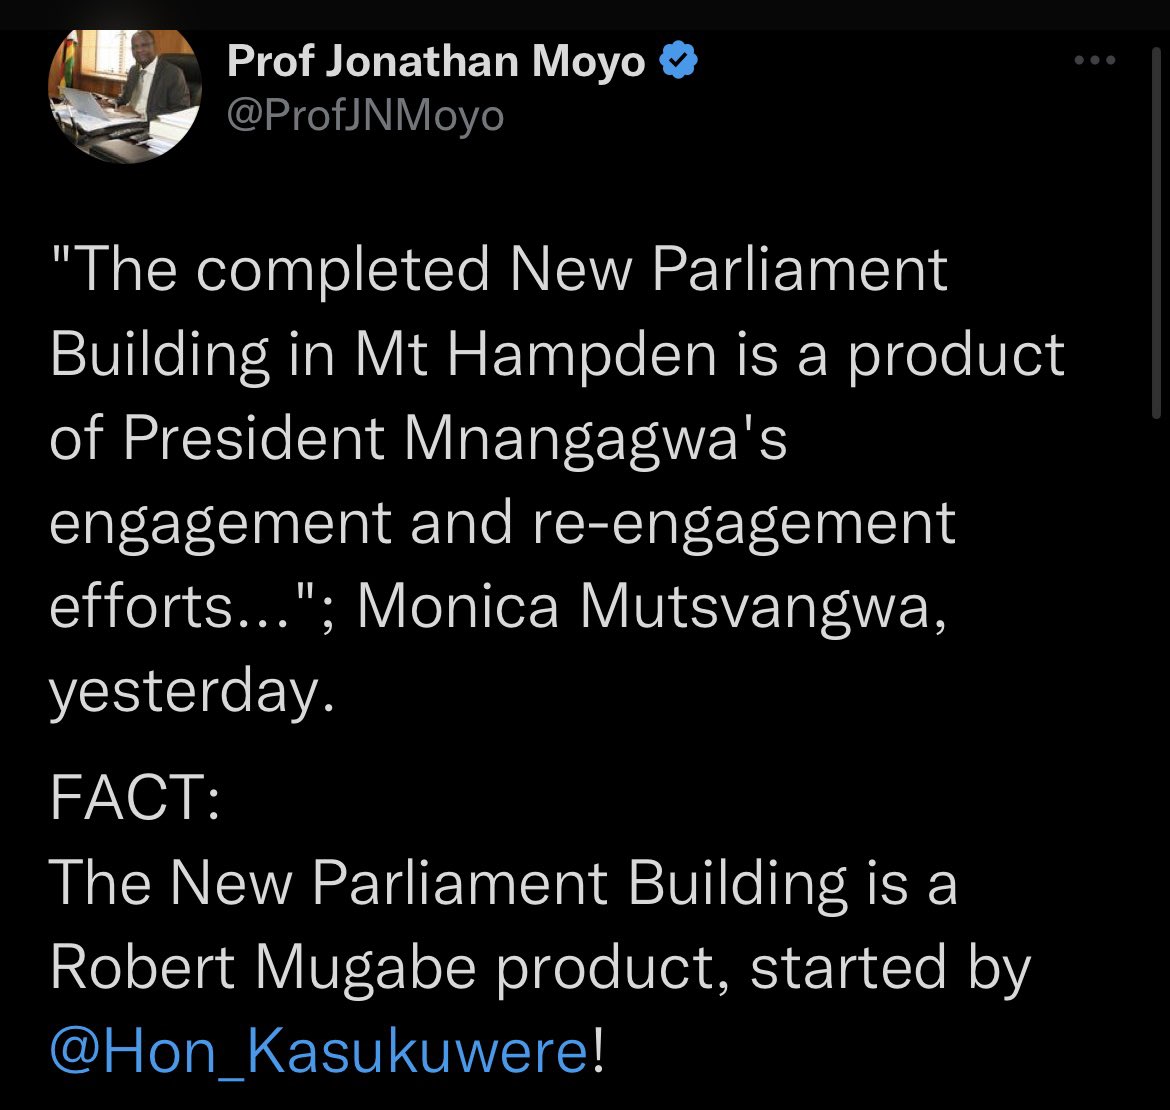 Cde @Hon_Kasukuwere tell us how you became the brains behind the new Parliament building as reported below